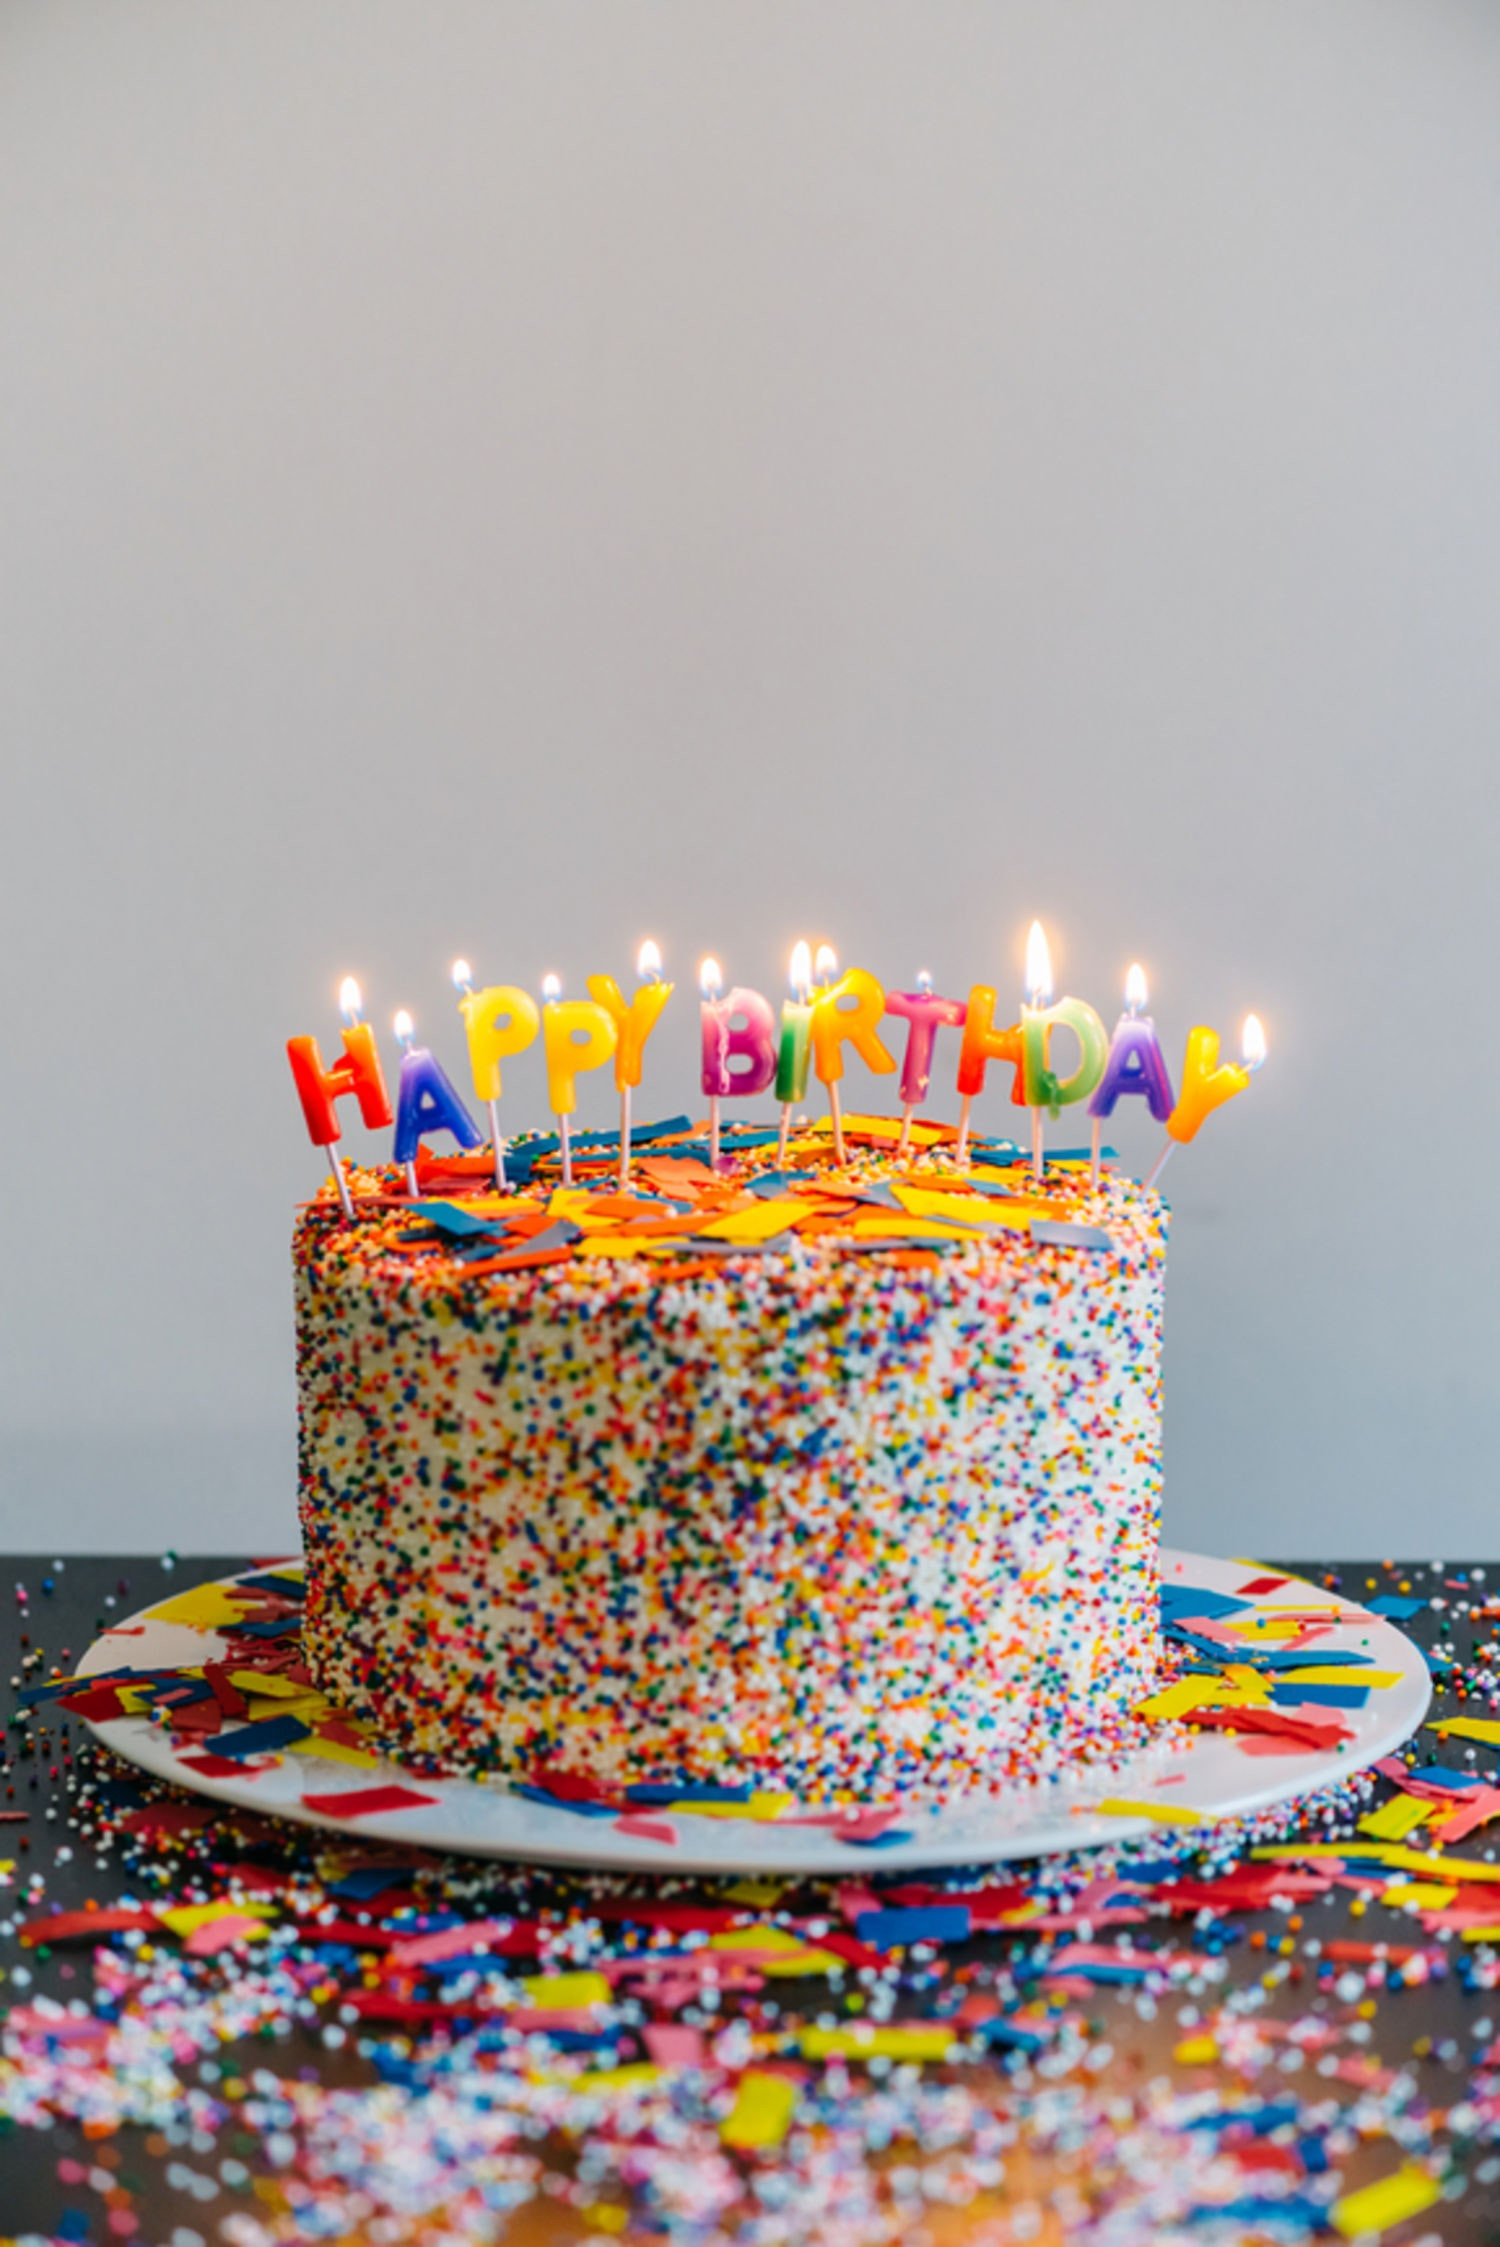 Easy Birthday Cake Decorating Ideas
 The Birthday Party Project How e Woman Throws Parties